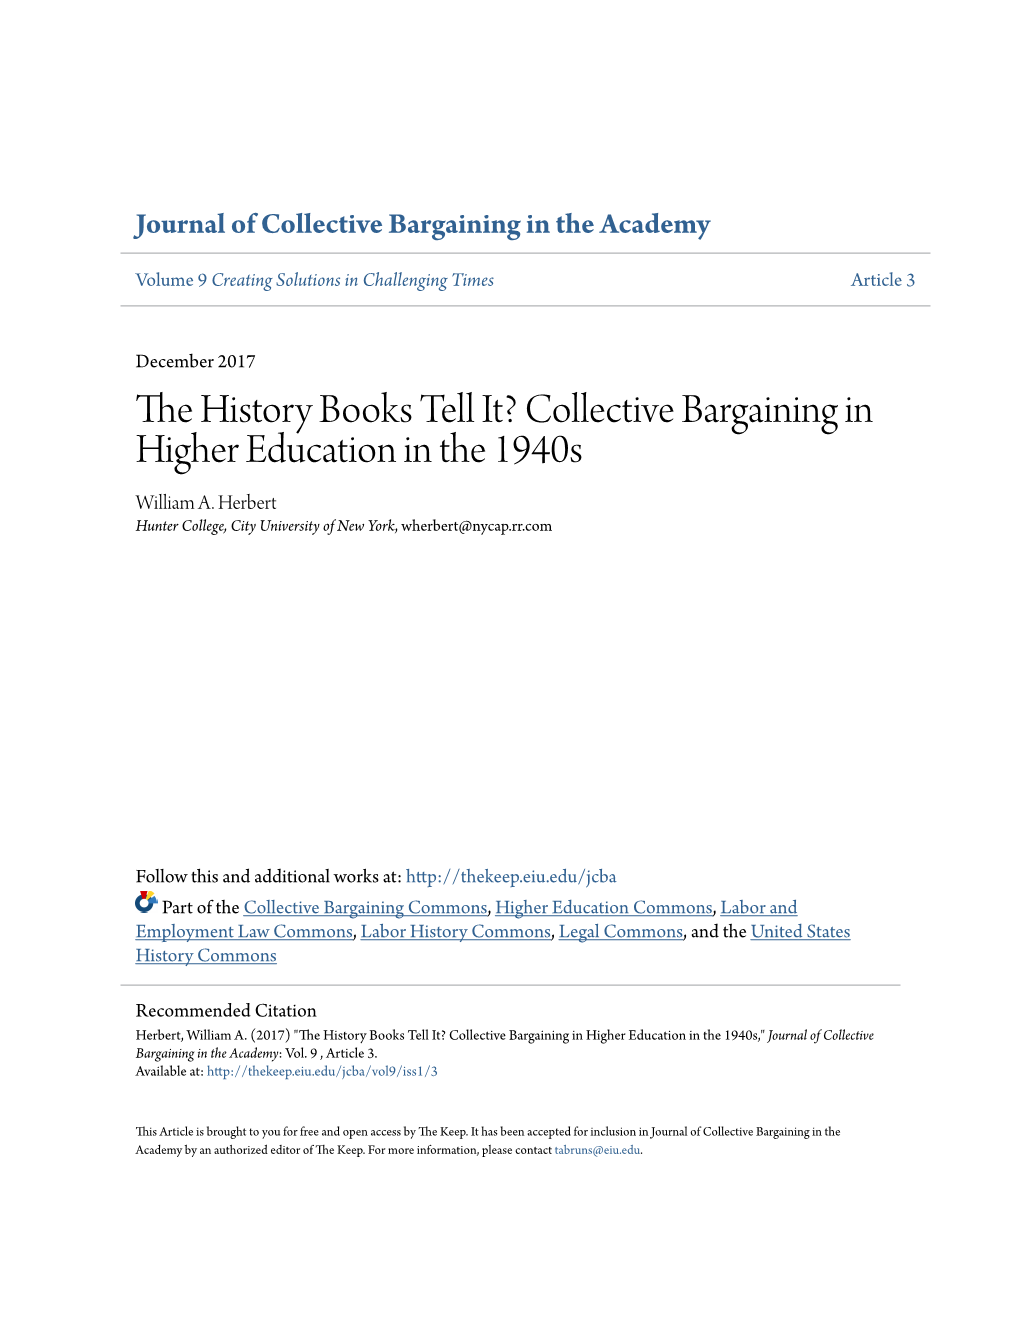 The History Books Tell It? Collective Bargaining in Higher Education in the 1940S